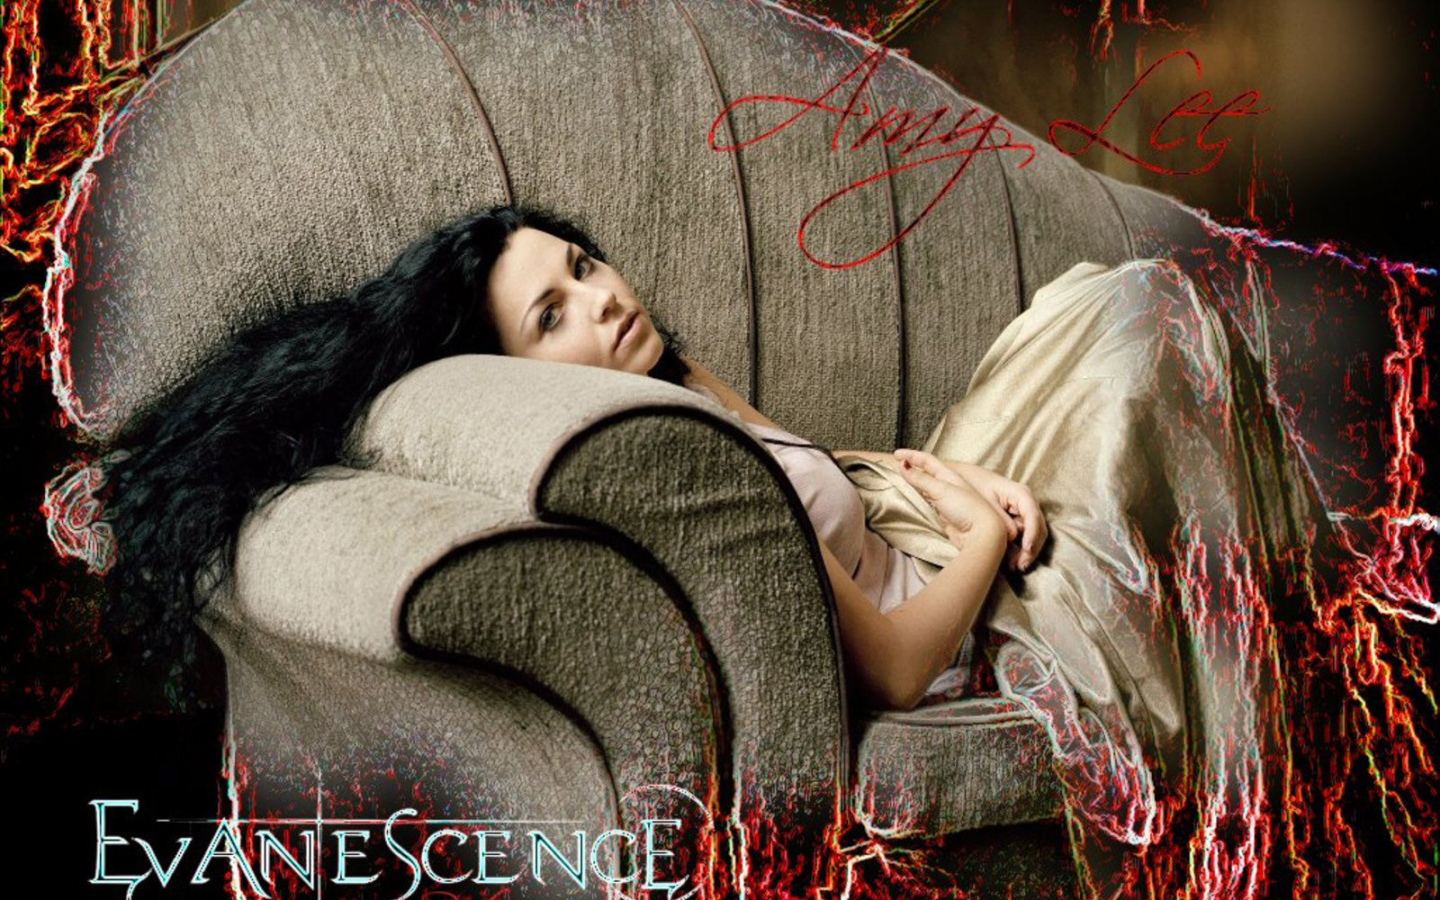 Beautiful wallpaper Amy Lee of Evanescence